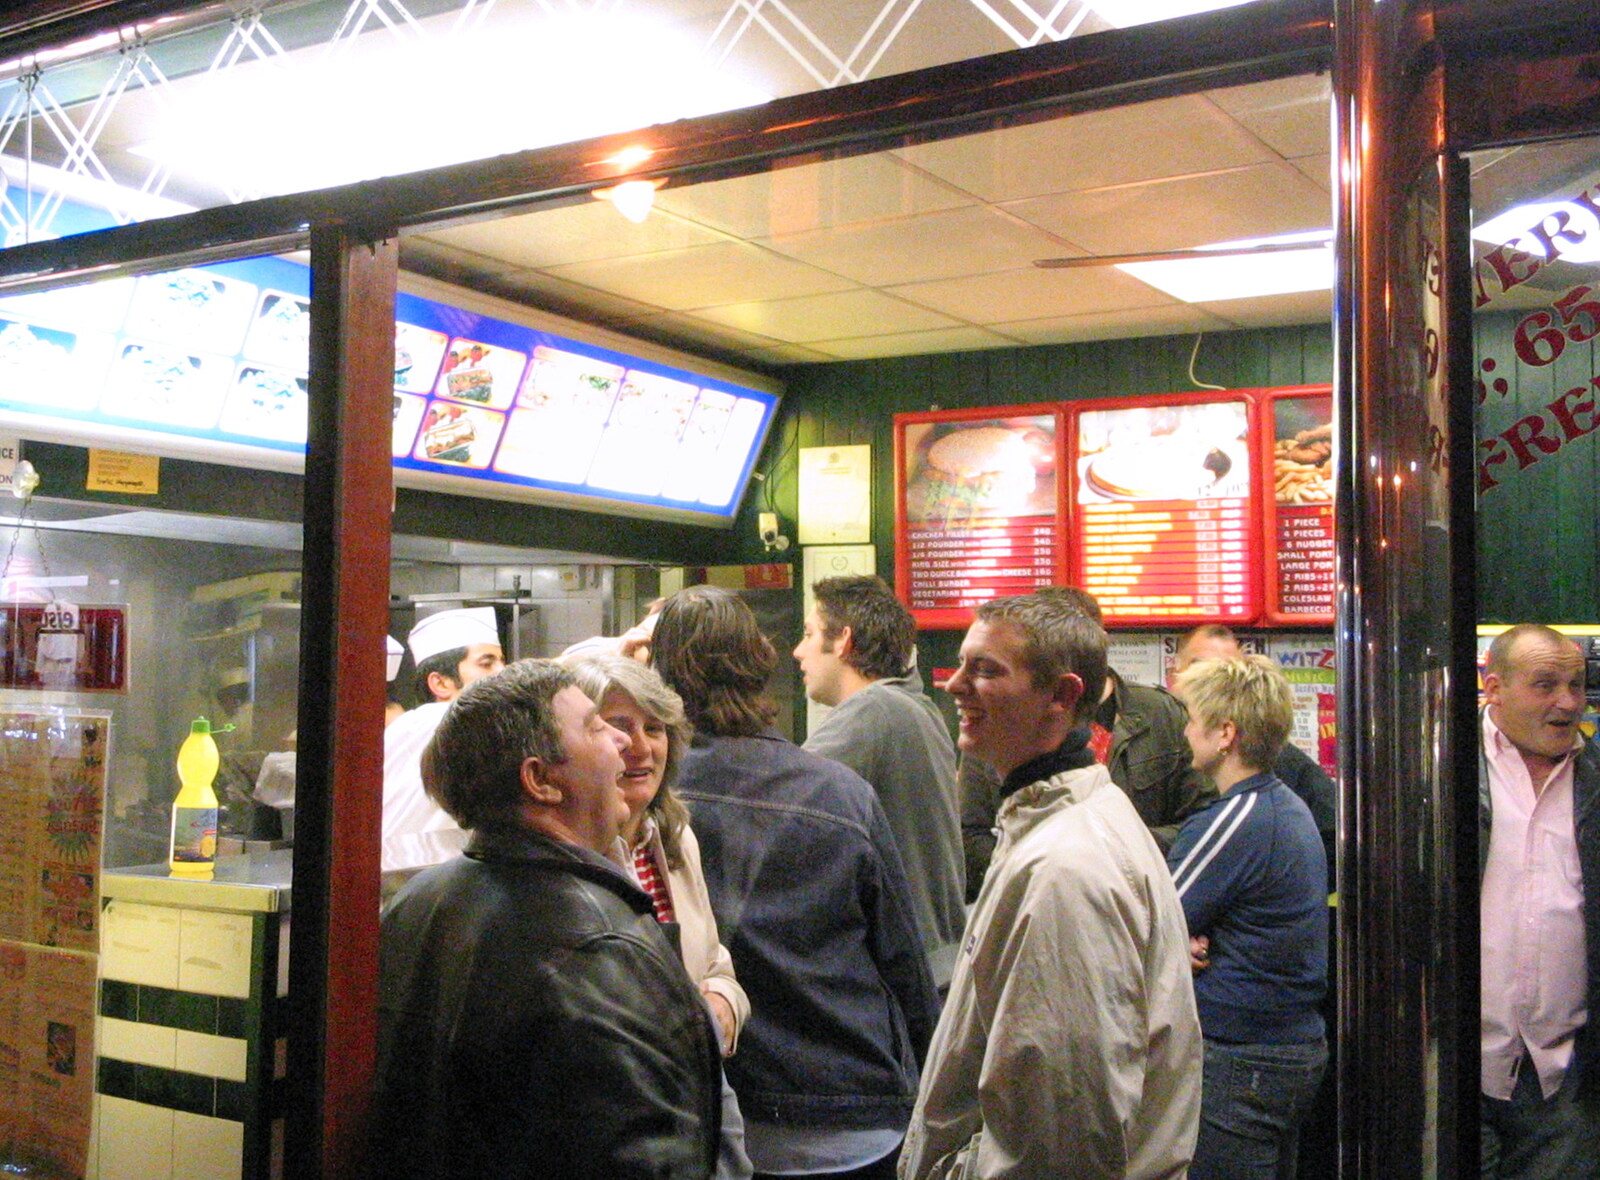 The kebab shop is packed from Music at the Waterfront and Upstairs at Revolution Records, Diss - 8th May 2005